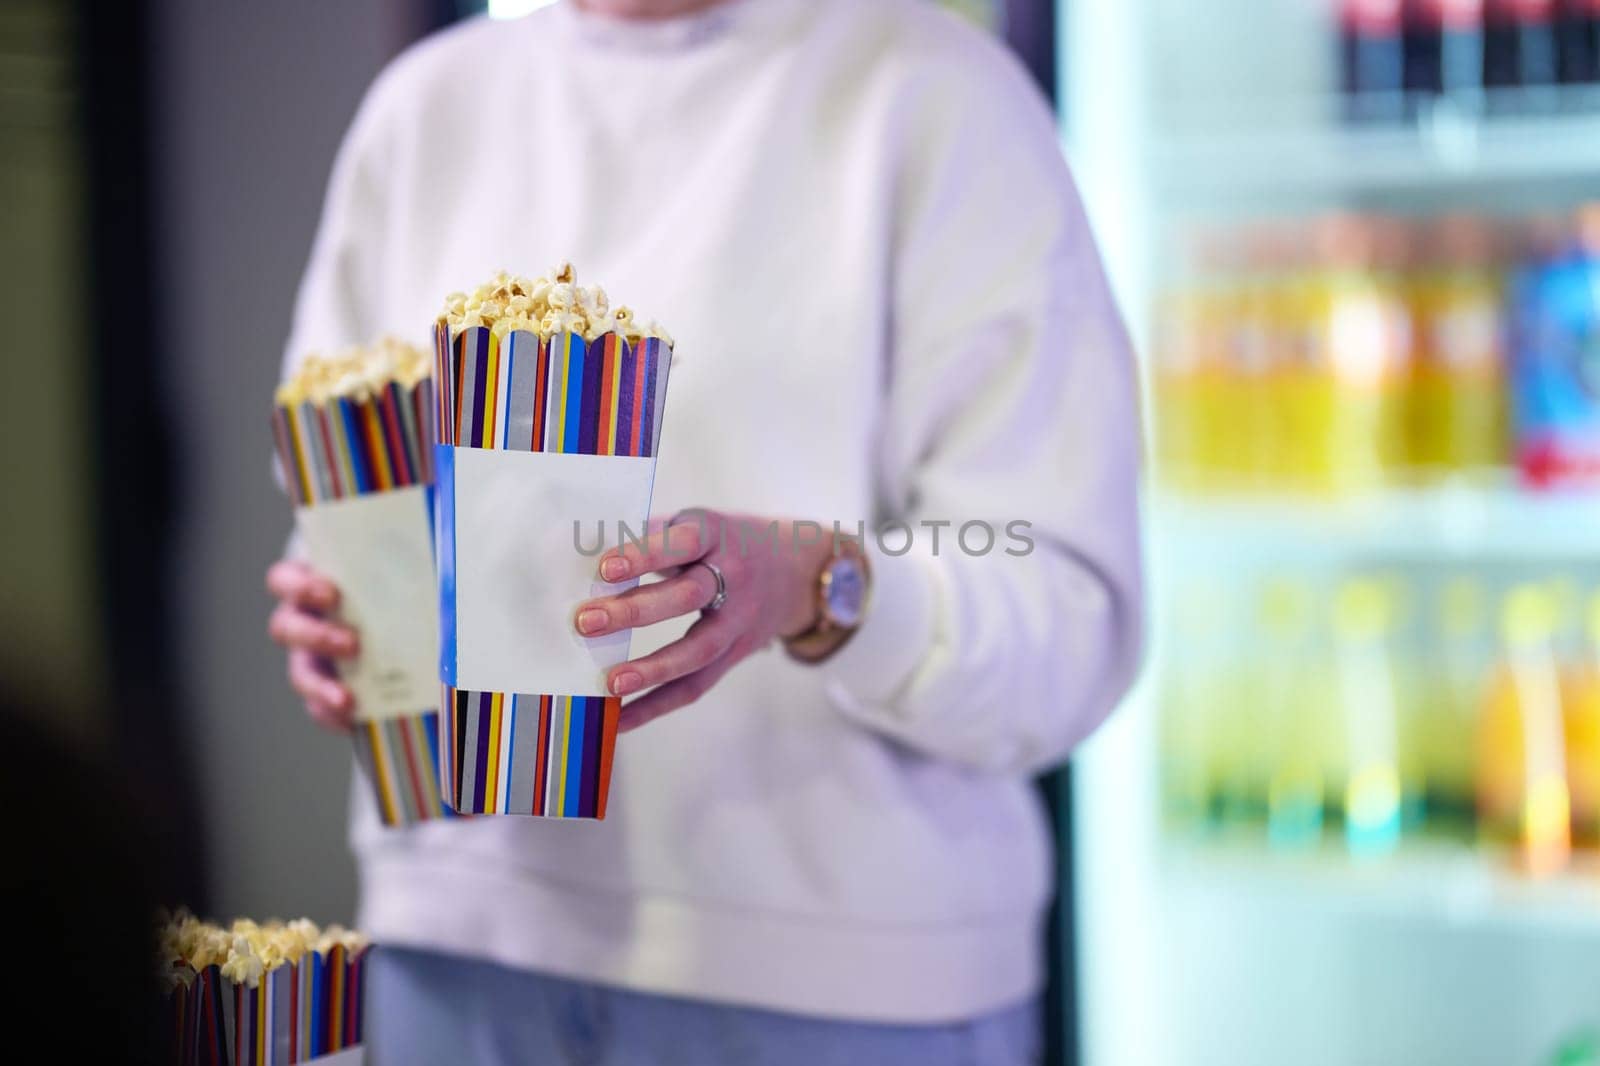 A vendor stands outside the cinema, holding freshly popped popcorn to sell to moviegoers before they enter the theater.